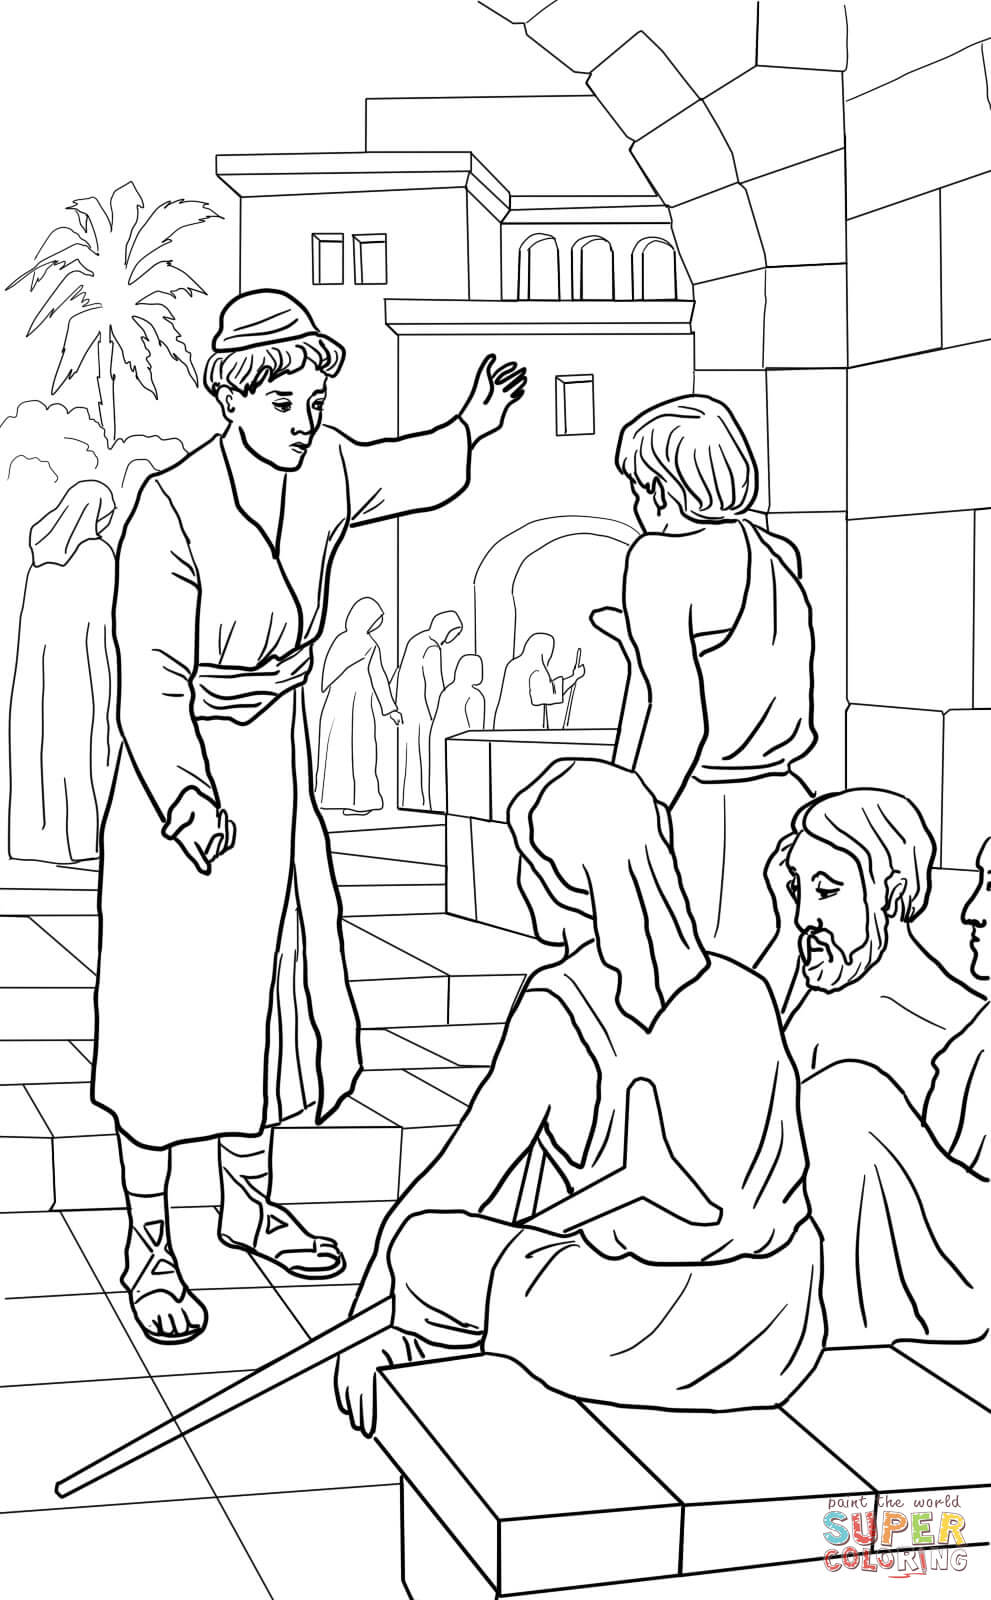 Parable of the great banquet coloring page free printable coloring pages